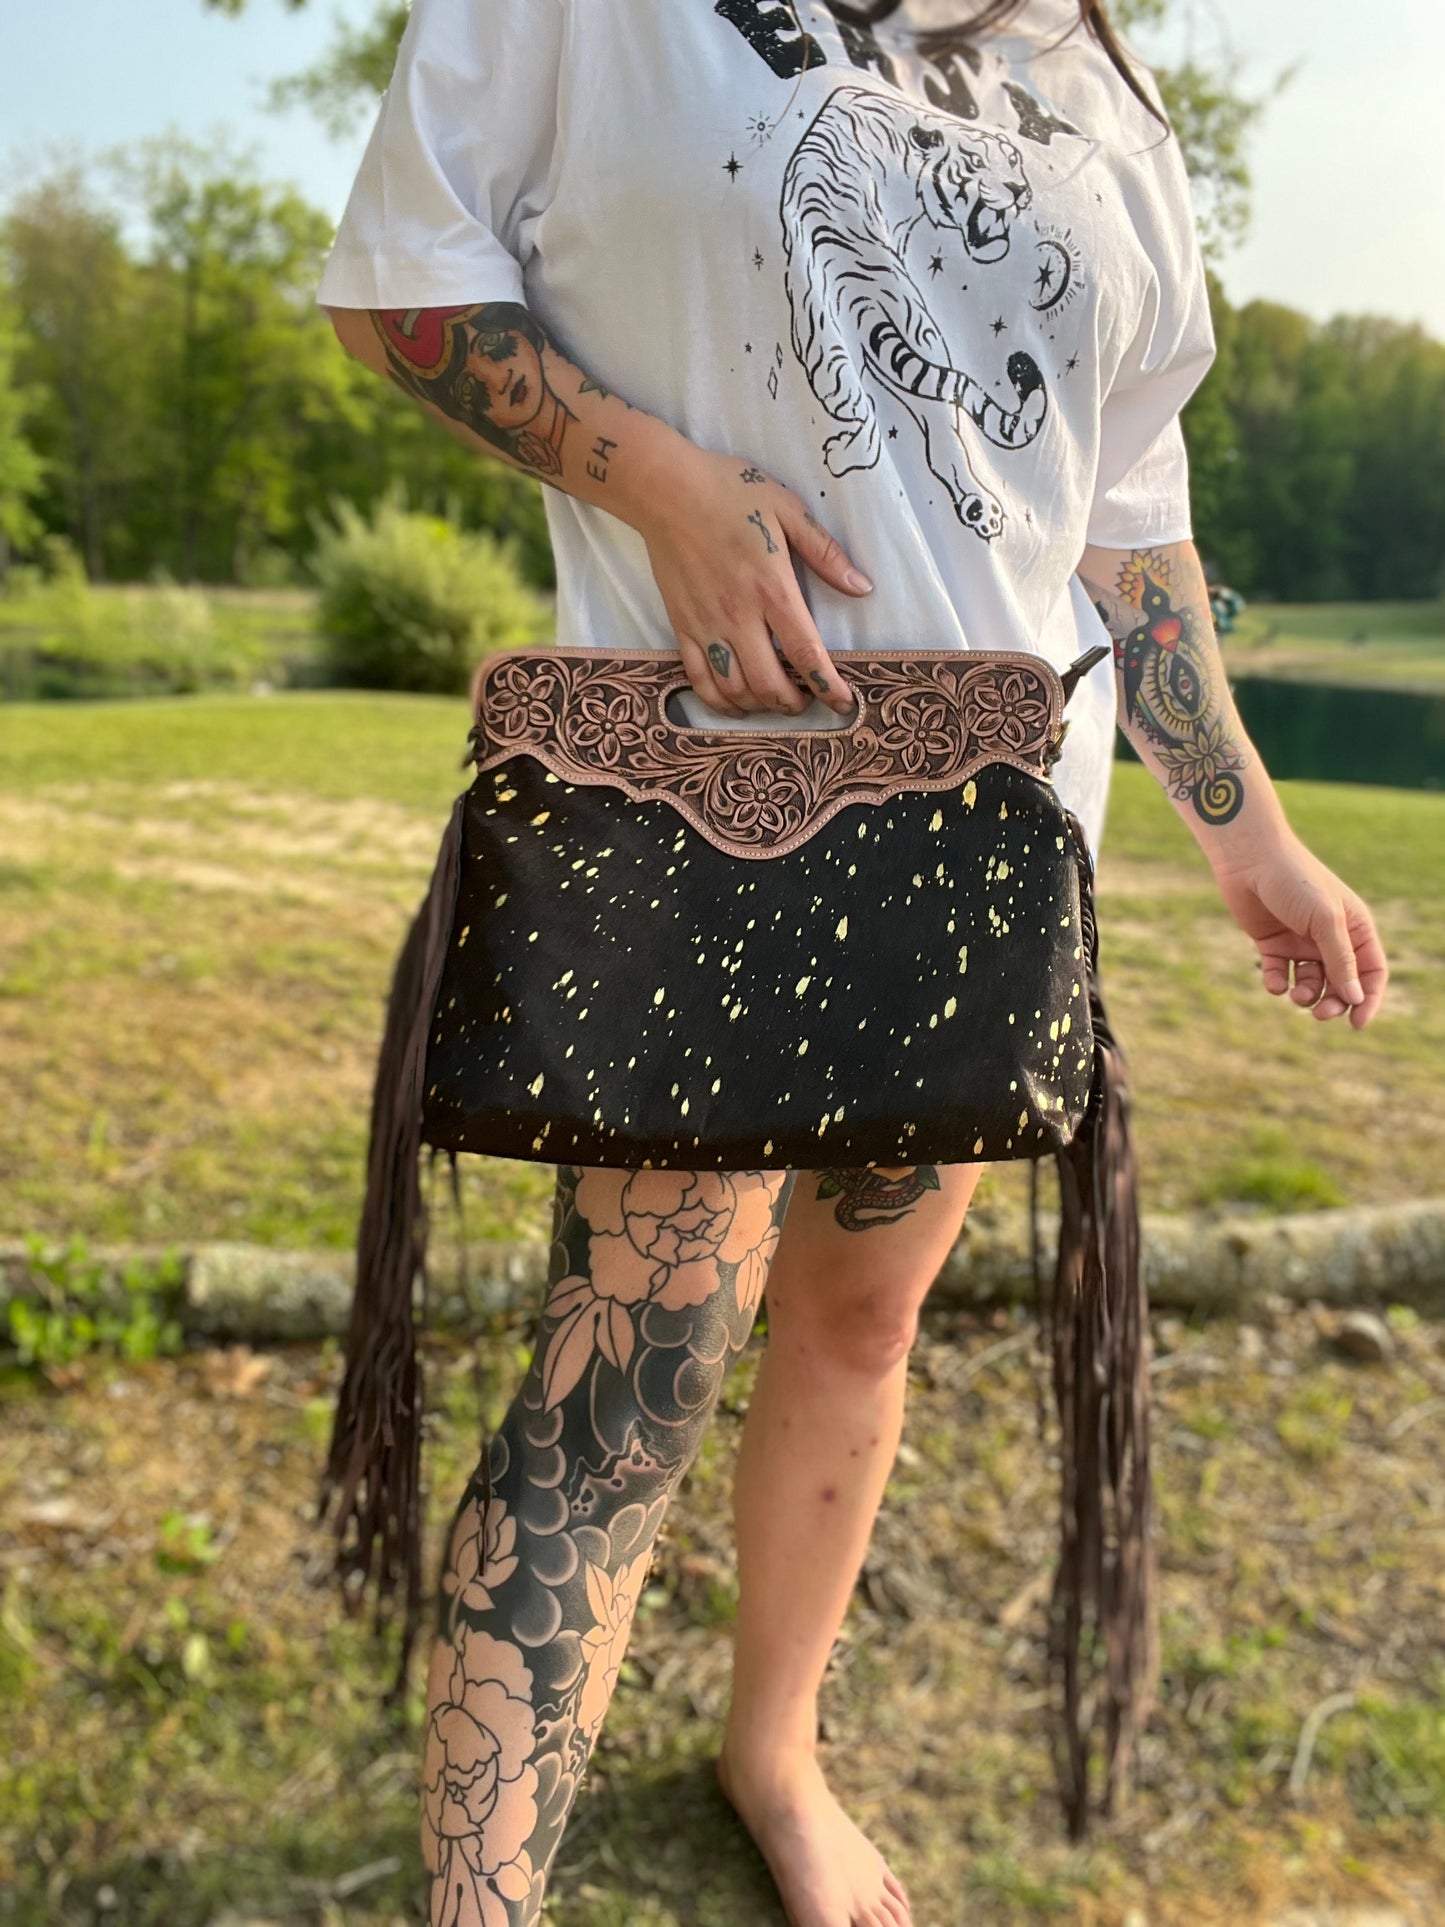 WESTERN LEATHER COWHIDE CROSSBODY CLUTCH - BROWN + GOLD SPECS